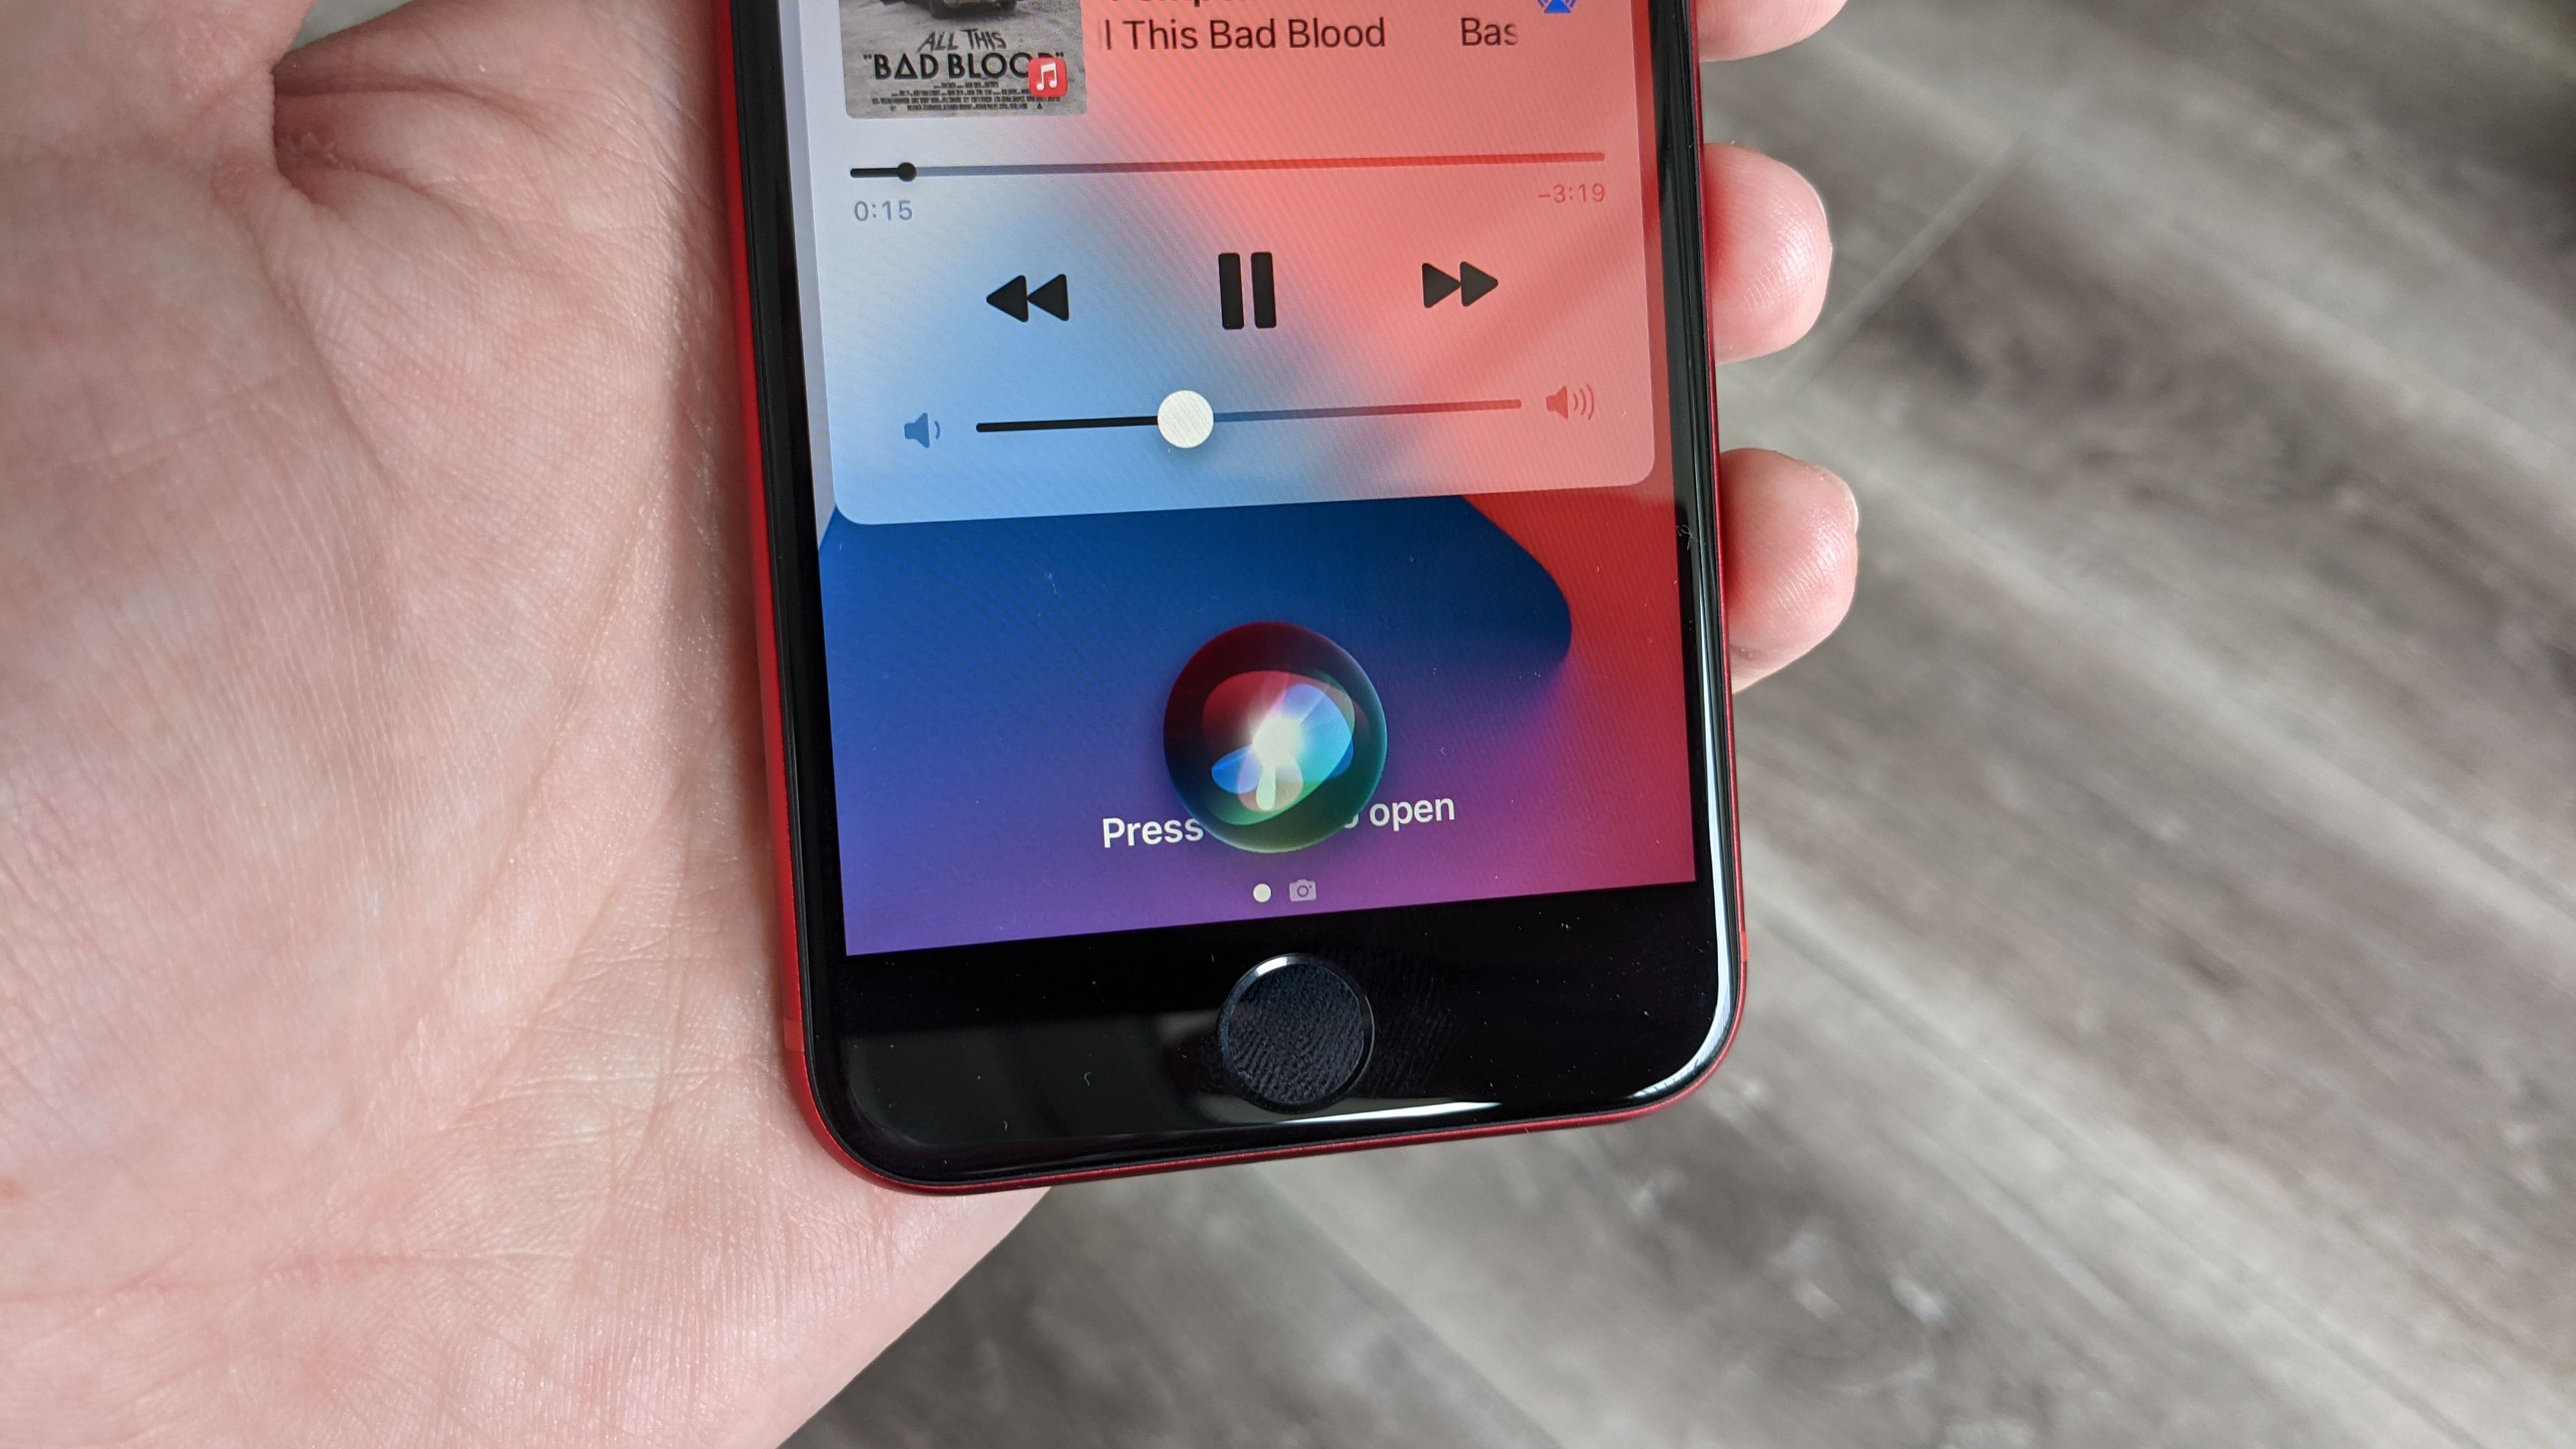 Siri being activated on an iPhone, here demonstrating the hidden iPhone features